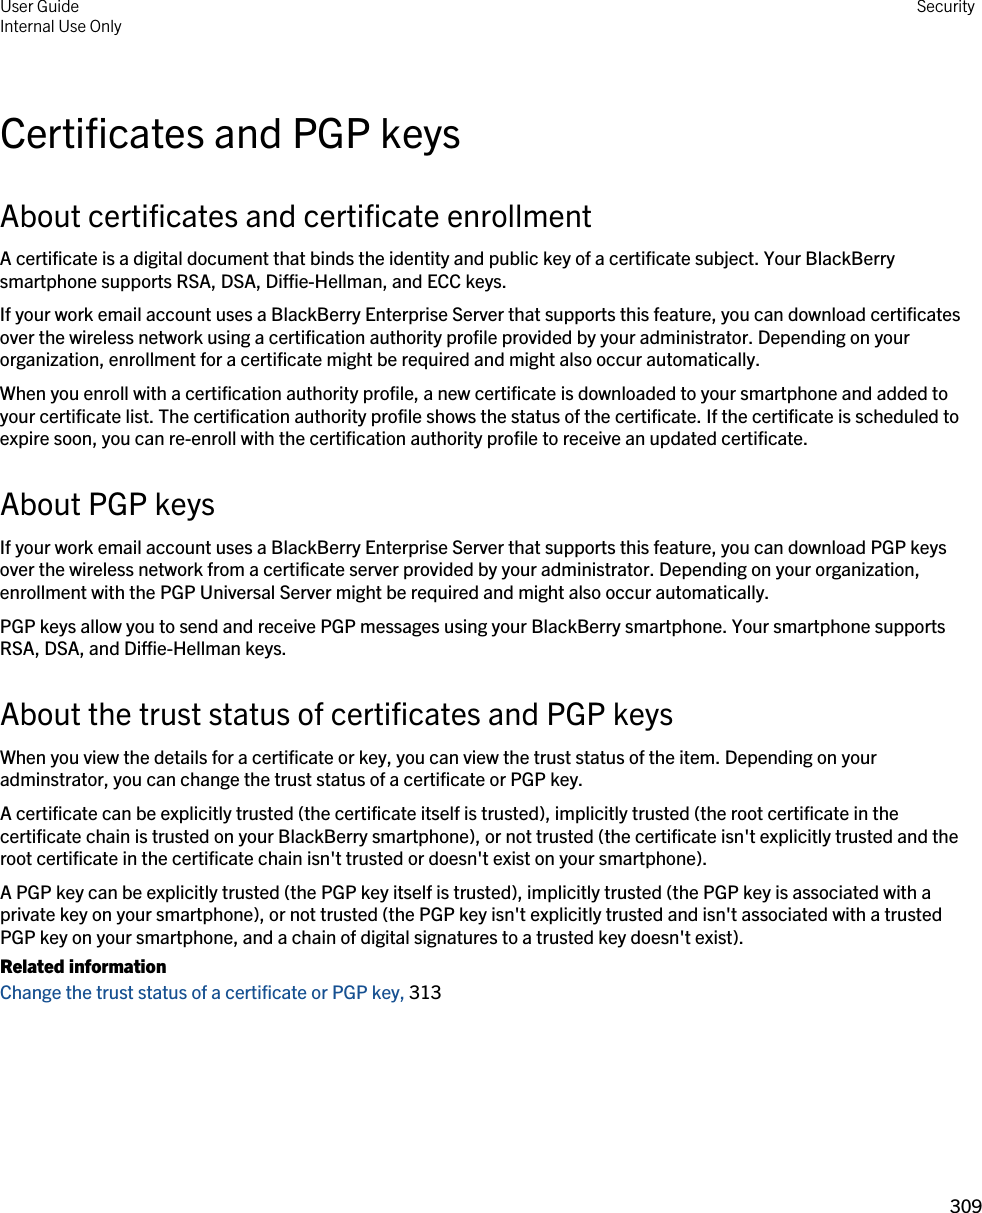 Certificates and PGP keysAbout certificates and certificate enrollmentA certificate is a digital document that binds the identity and public key of a certificate subject. Your BlackBerry smartphone supports RSA, DSA, Diffie-Hellman, and ECC keys.If your work email account uses a BlackBerry Enterprise Server that supports this feature, you can download certificates over the wireless network using a certification authority profile provided by your administrator. Depending on your organization, enrollment for a certificate might be required and might also occur automatically.When you enroll with a certification authority profile, a new certificate is downloaded to your smartphone and added to your certificate list. The certification authority profile shows the status of the certificate. If the certificate is scheduled to expire soon, you can re-enroll with the certification authority profile to receive an updated certificate.About PGP keysIf your work email account uses a BlackBerry Enterprise Server that supports this feature, you can download PGP keys over the wireless network from a certificate server provided by your administrator. Depending on your organization, enrollment with the PGP Universal Server might be required and might also occur automatically.PGP keys allow you to send and receive PGP messages using your BlackBerry smartphone. Your smartphone supports RSA, DSA, and Diffie-Hellman keys.About the trust status of certificates and PGP keysWhen you view the details for a certificate or key, you can view the trust status of the item. Depending on your adminstrator, you can change the trust status of a certificate or PGP key.A certificate can be explicitly trusted (the certificate itself is trusted), implicitly trusted (the root certificate in the certificate chain is trusted on your BlackBerry smartphone), or not trusted (the certificate isn&apos;t explicitly trusted and the root certificate in the certificate chain isn&apos;t trusted or doesn&apos;t exist on your smartphone).A PGP key can be explicitly trusted (the PGP key itself is trusted), implicitly trusted (the PGP key is associated with a private key on your smartphone), or not trusted (the PGP key isn&apos;t explicitly trusted and isn&apos;t associated with a trusted PGP key on your smartphone, and a chain of digital signatures to a trusted key doesn&apos;t exist).Related informationChange the trust status of a certificate or PGP key, 313User GuideInternal Use Only Security309 